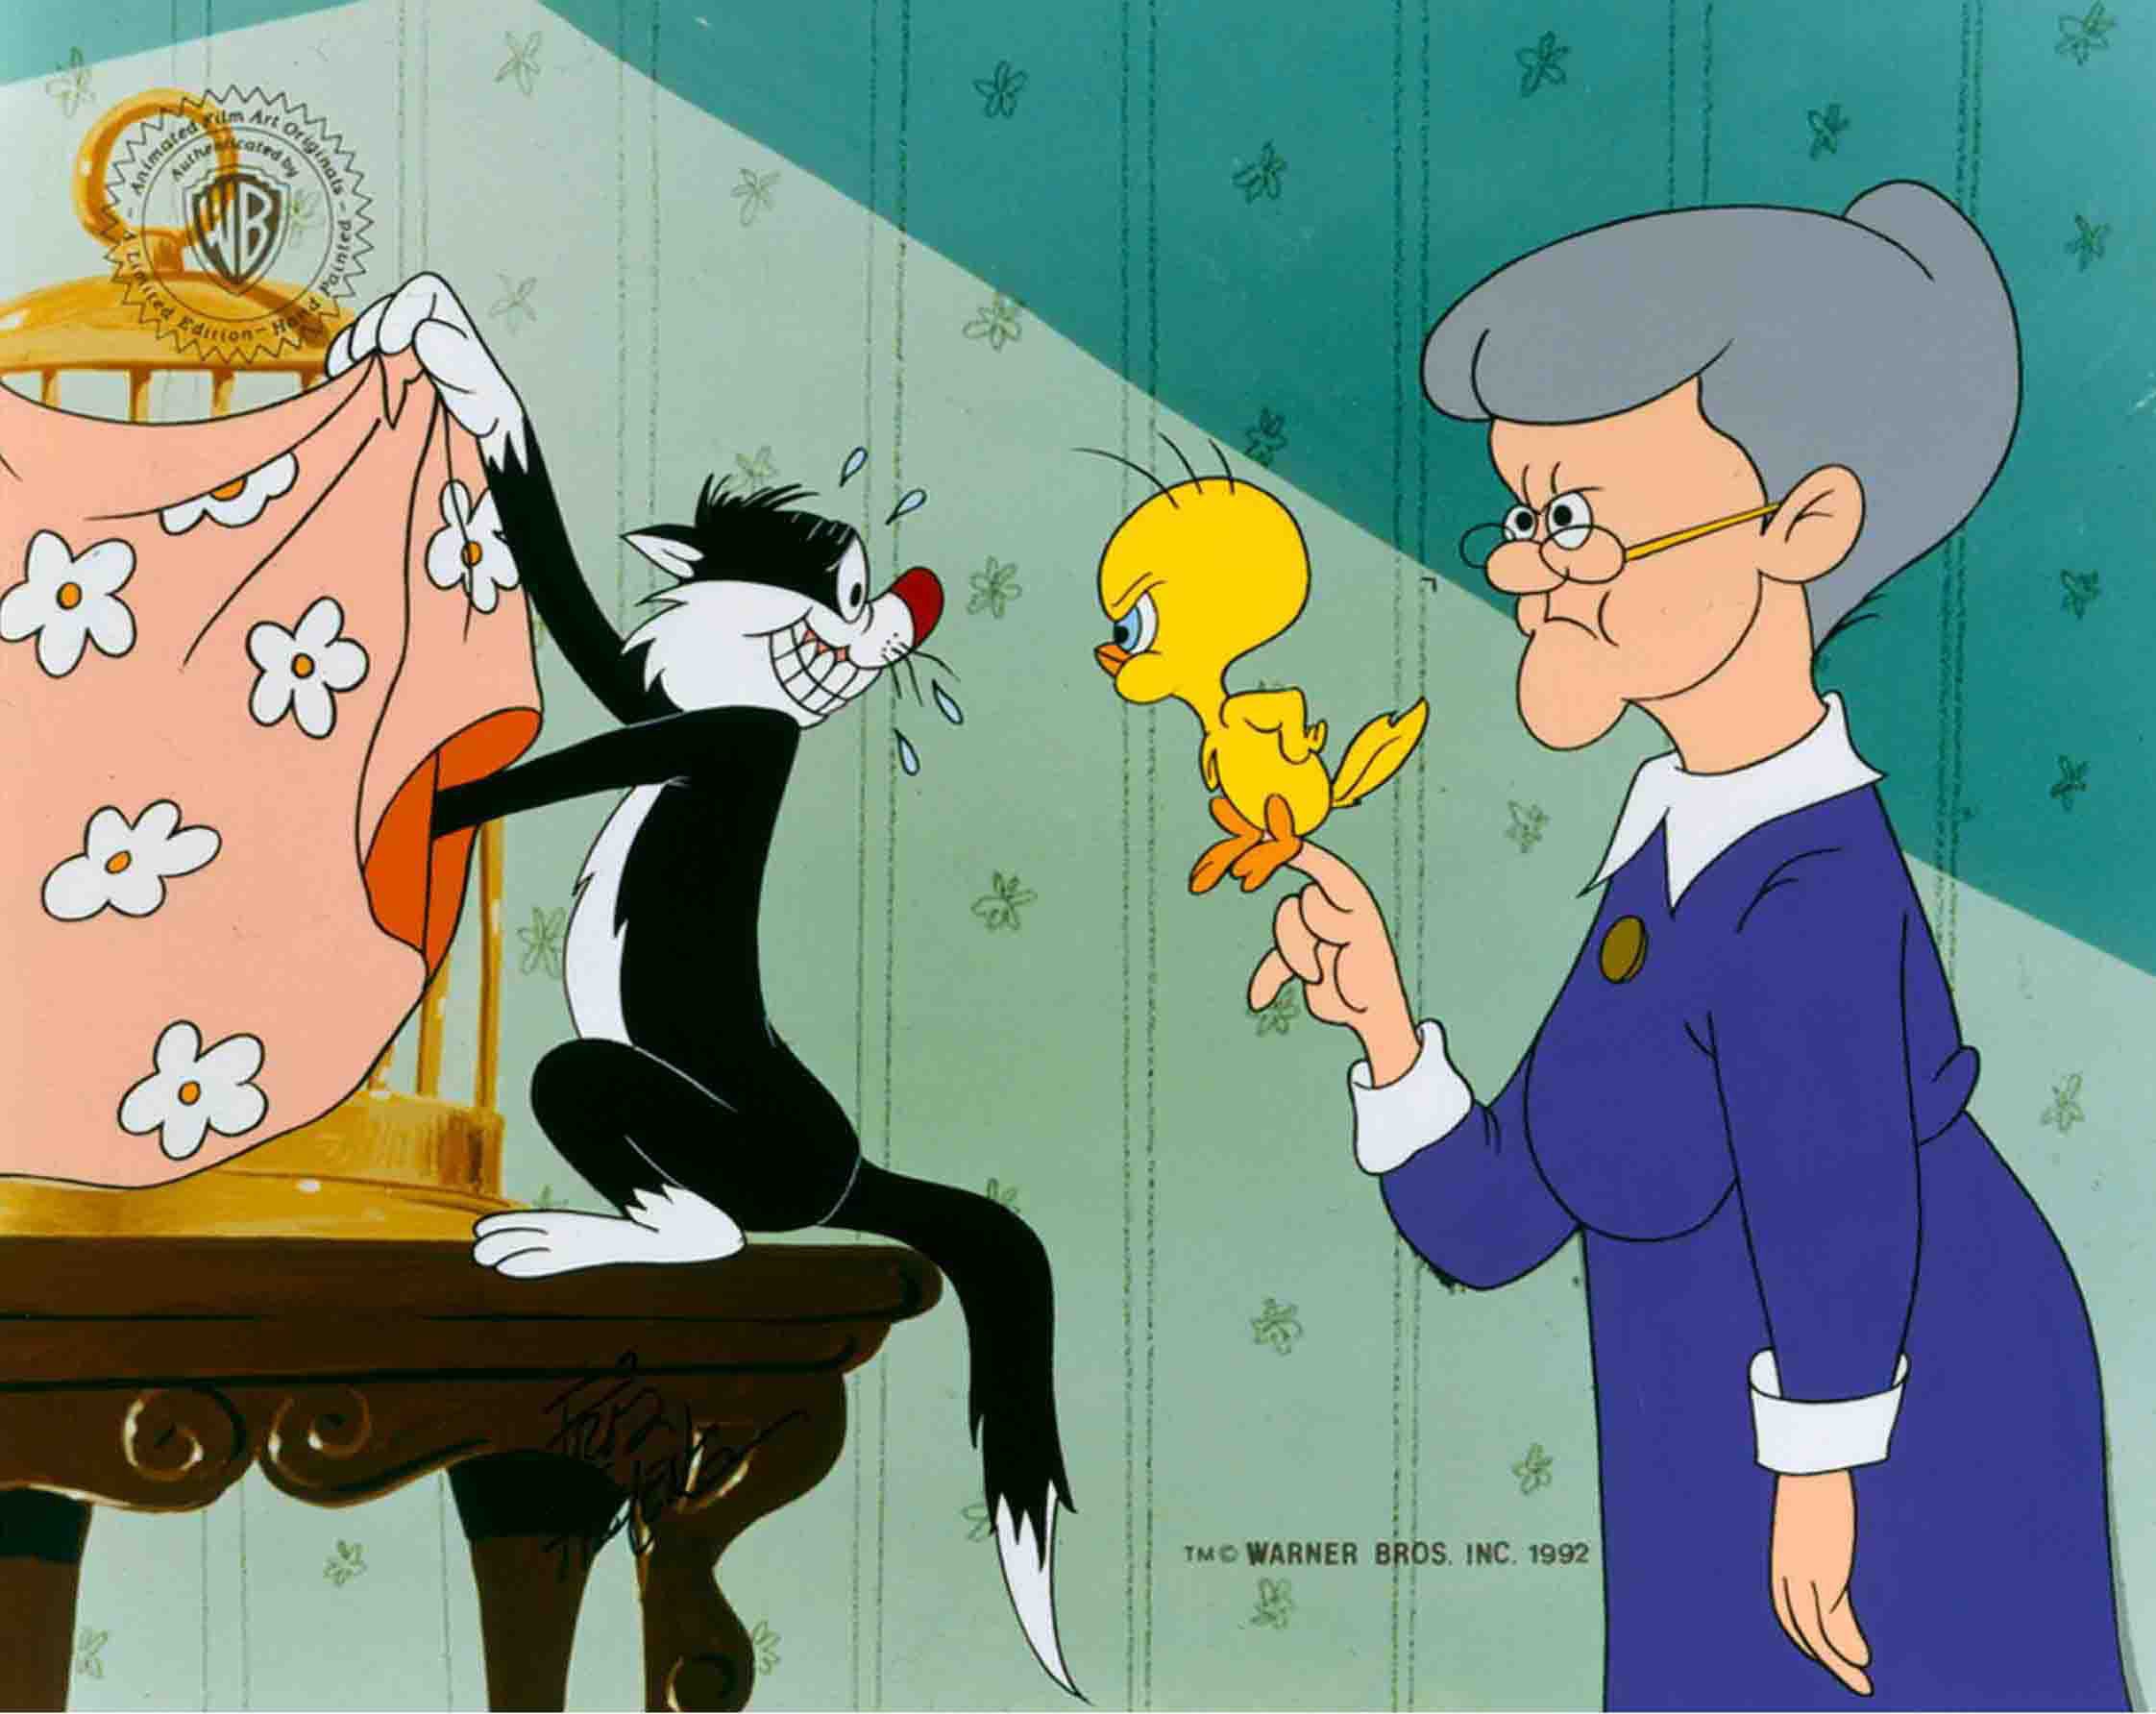 Granny and Tweety catch Sylvester in the act again.  